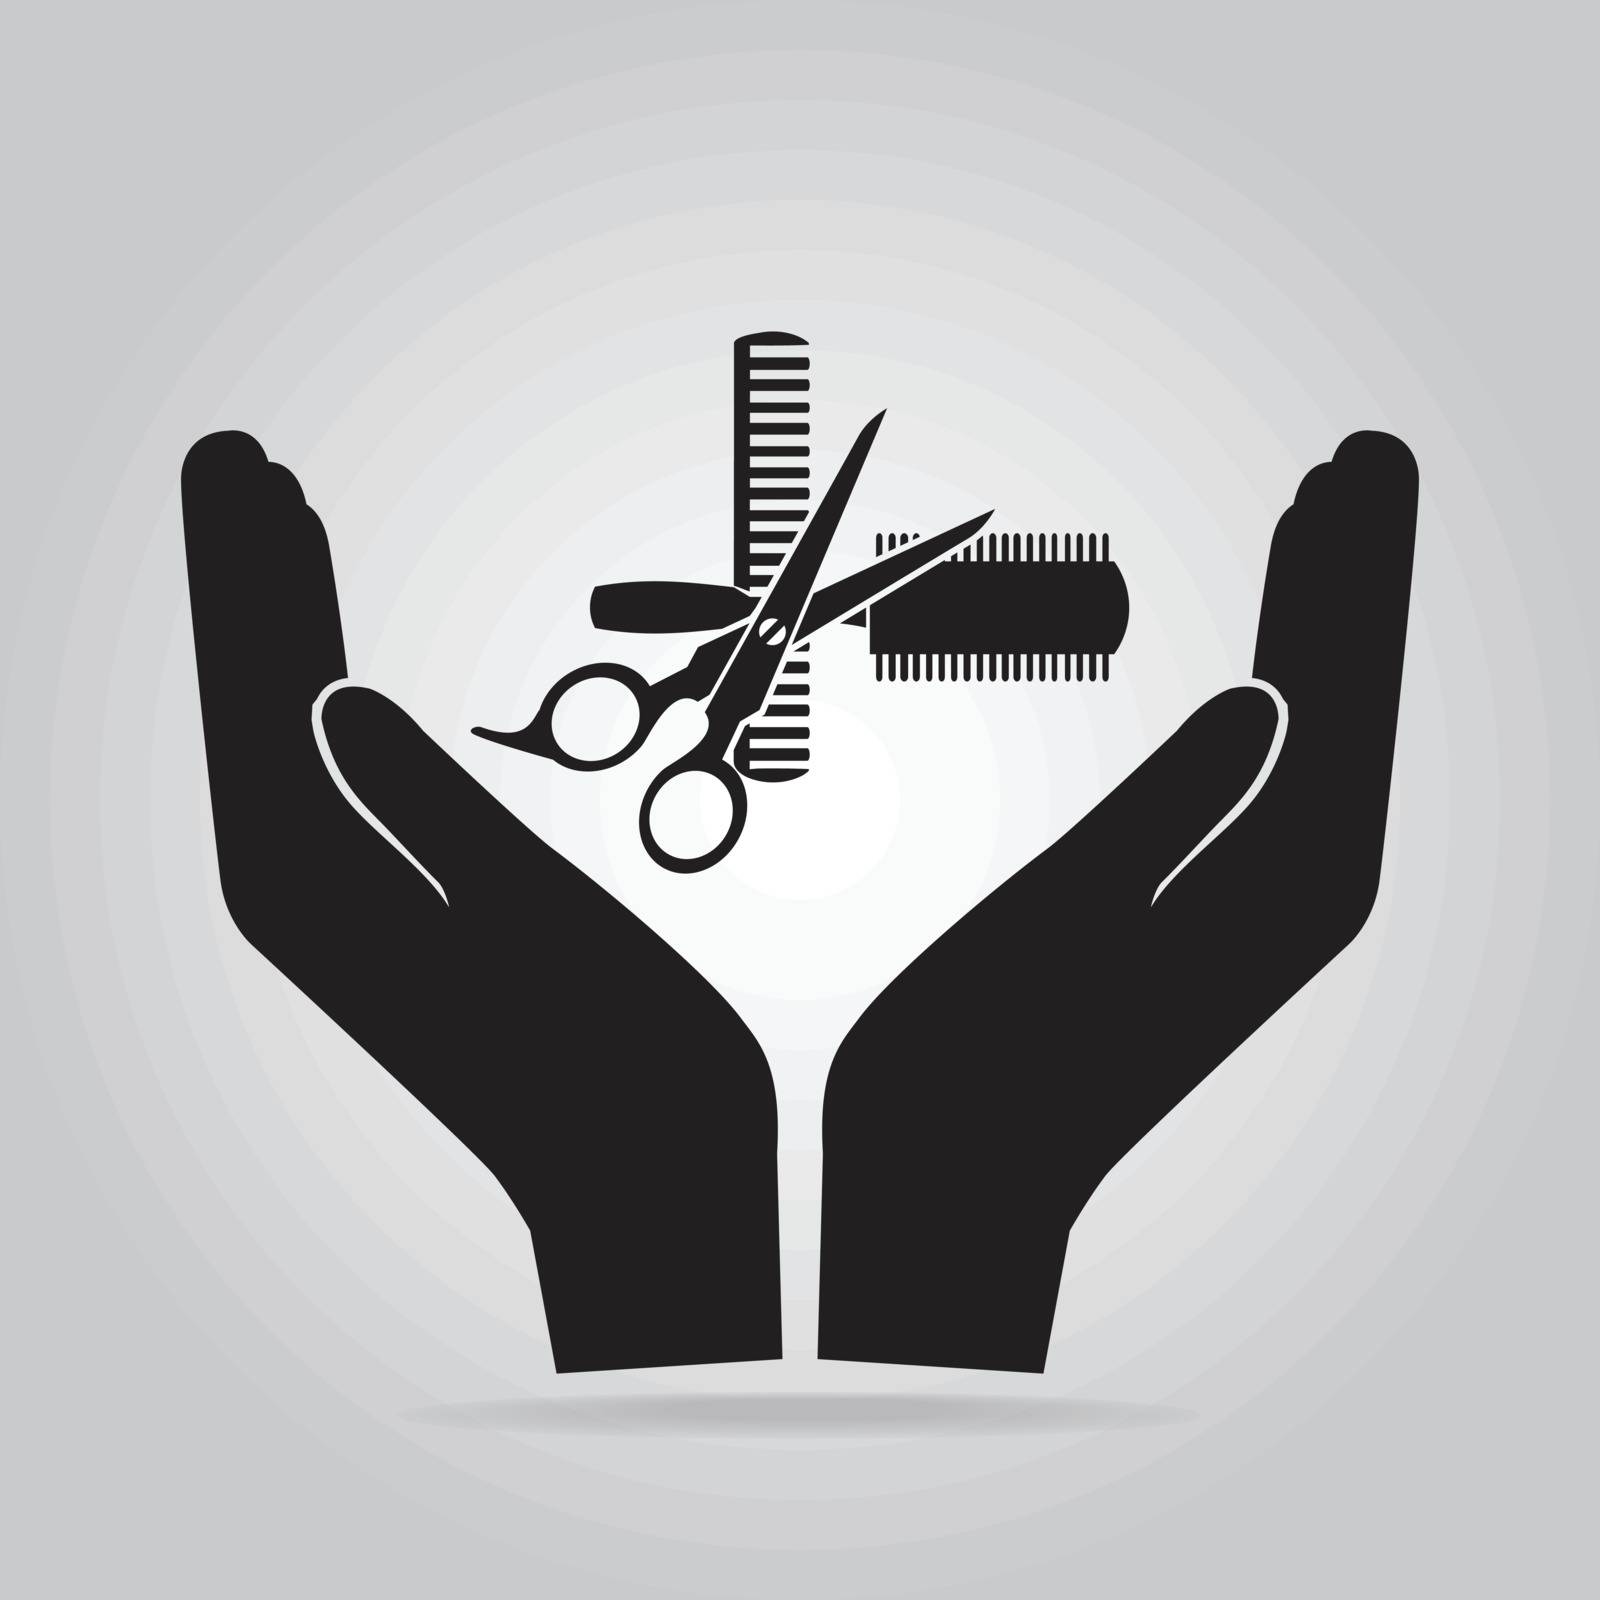 Hair salon with scissors and comb in hand icon by Kheat